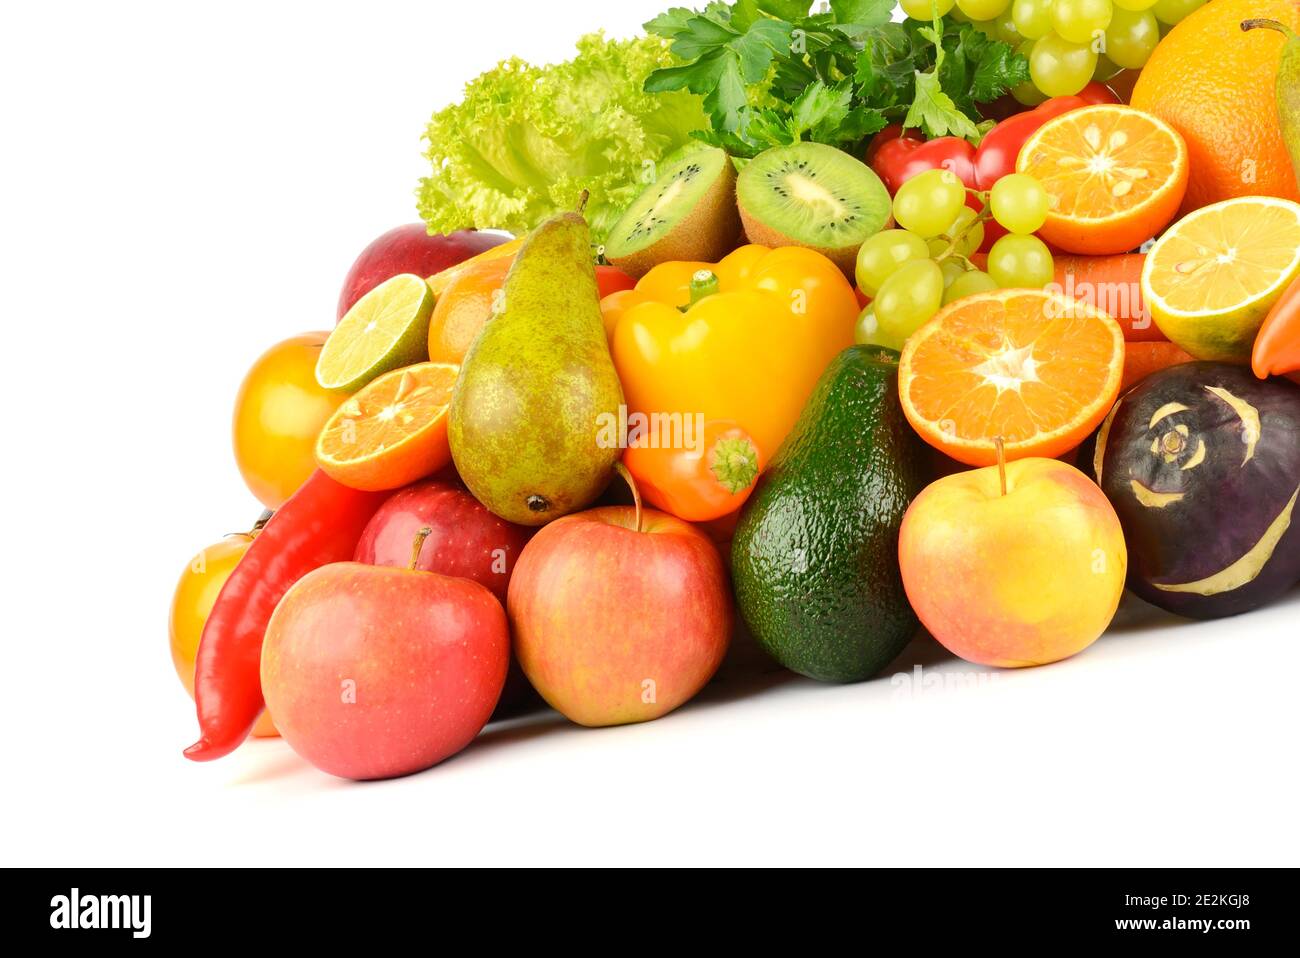 Composition with healthy fruits and vegetables isolated on white background Stock Photo